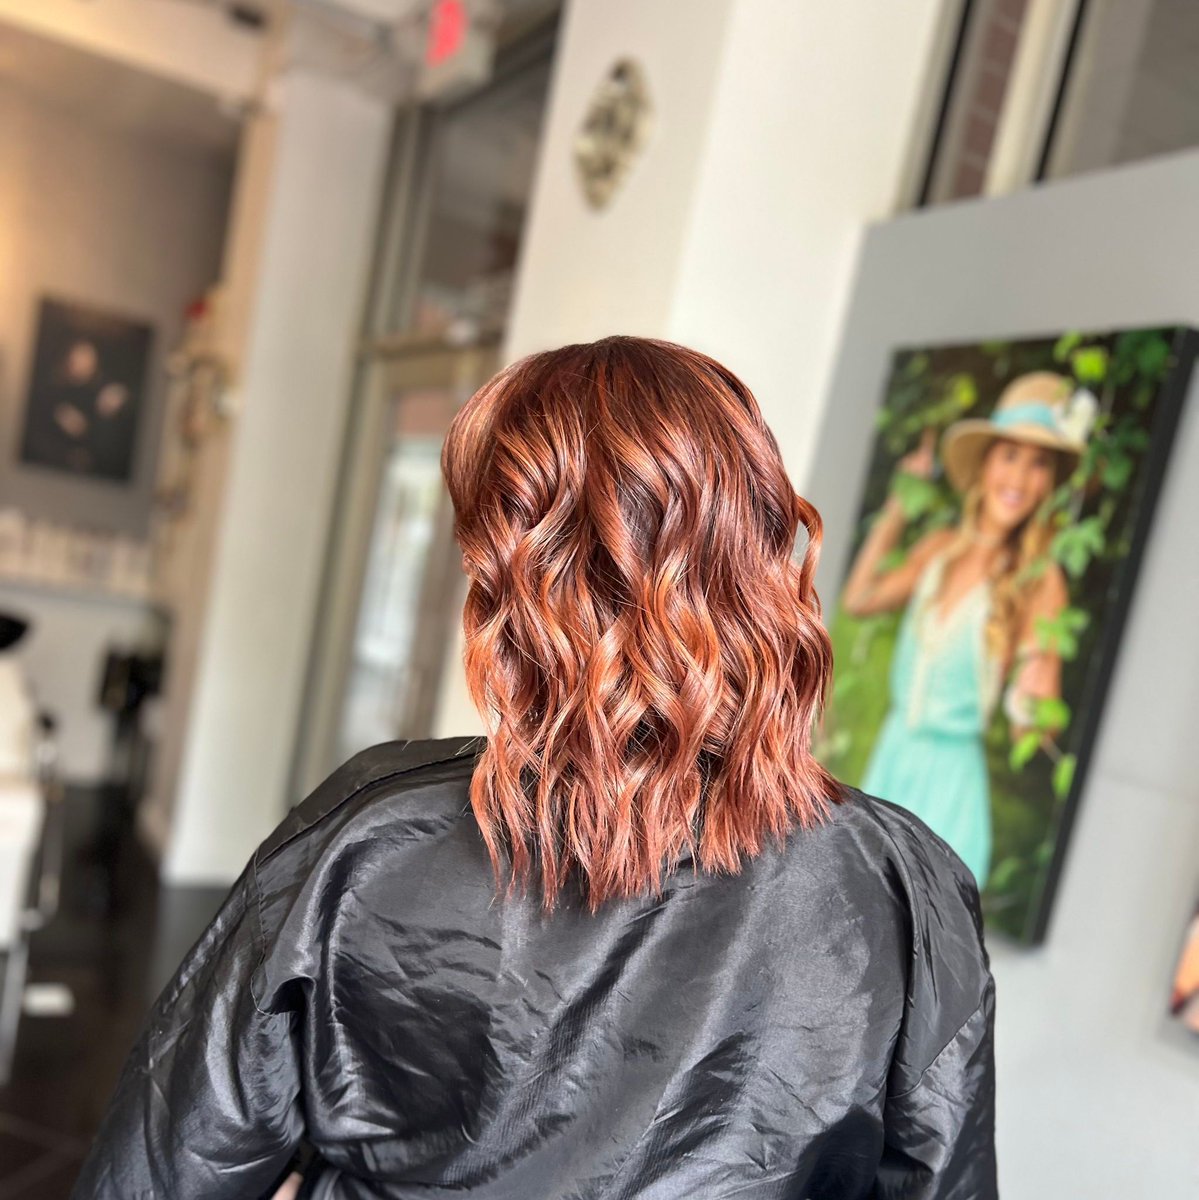 Christy is one of our stylists and was in need of some pampering! Gracie took care of her and covered her sparkles up she absolutely loved the outcome! 

#lavishthewoodlands #thewoodlands #houstontx #woodlandsbalayage #salonthewoodlands #houstonsalon #blowdrybarthewoodlands